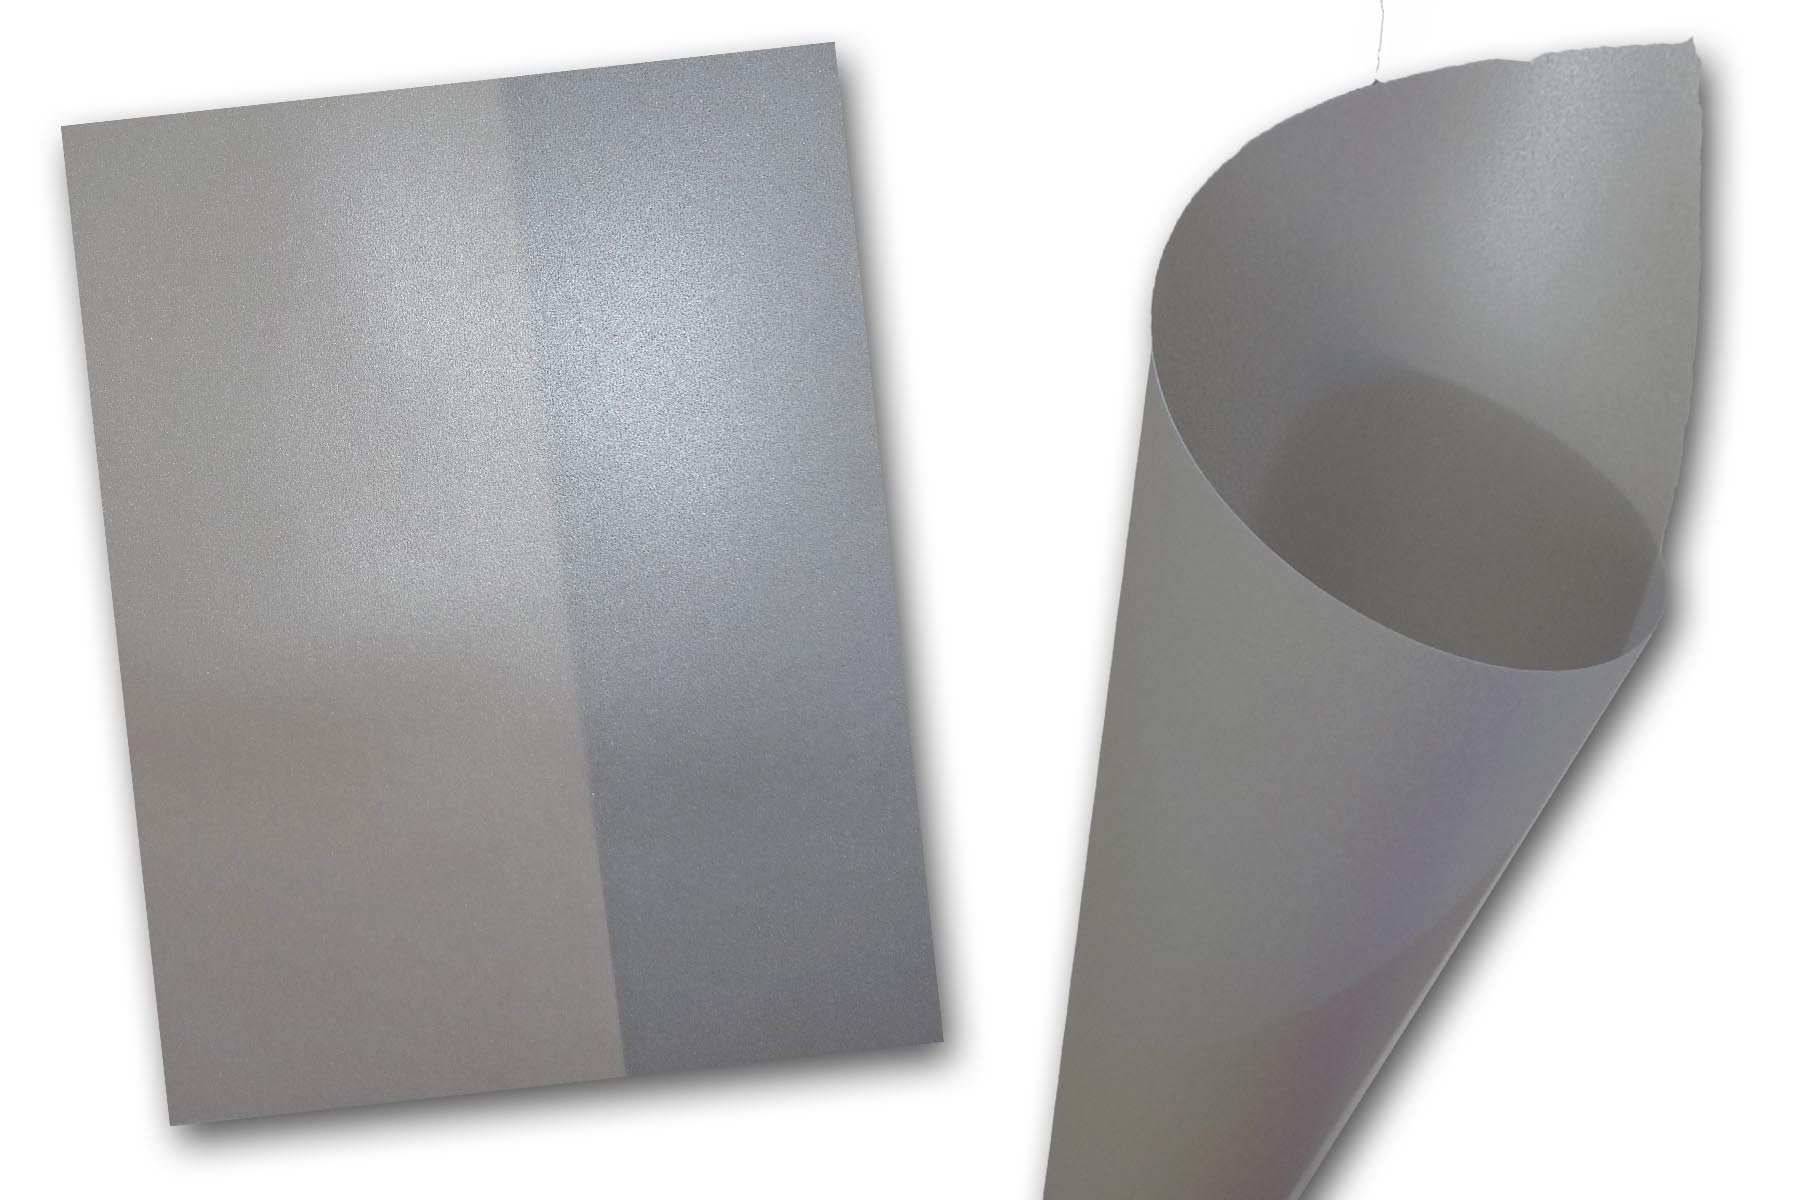 Shimmery Translucent Iridescent Silver Paper for Weddings and More